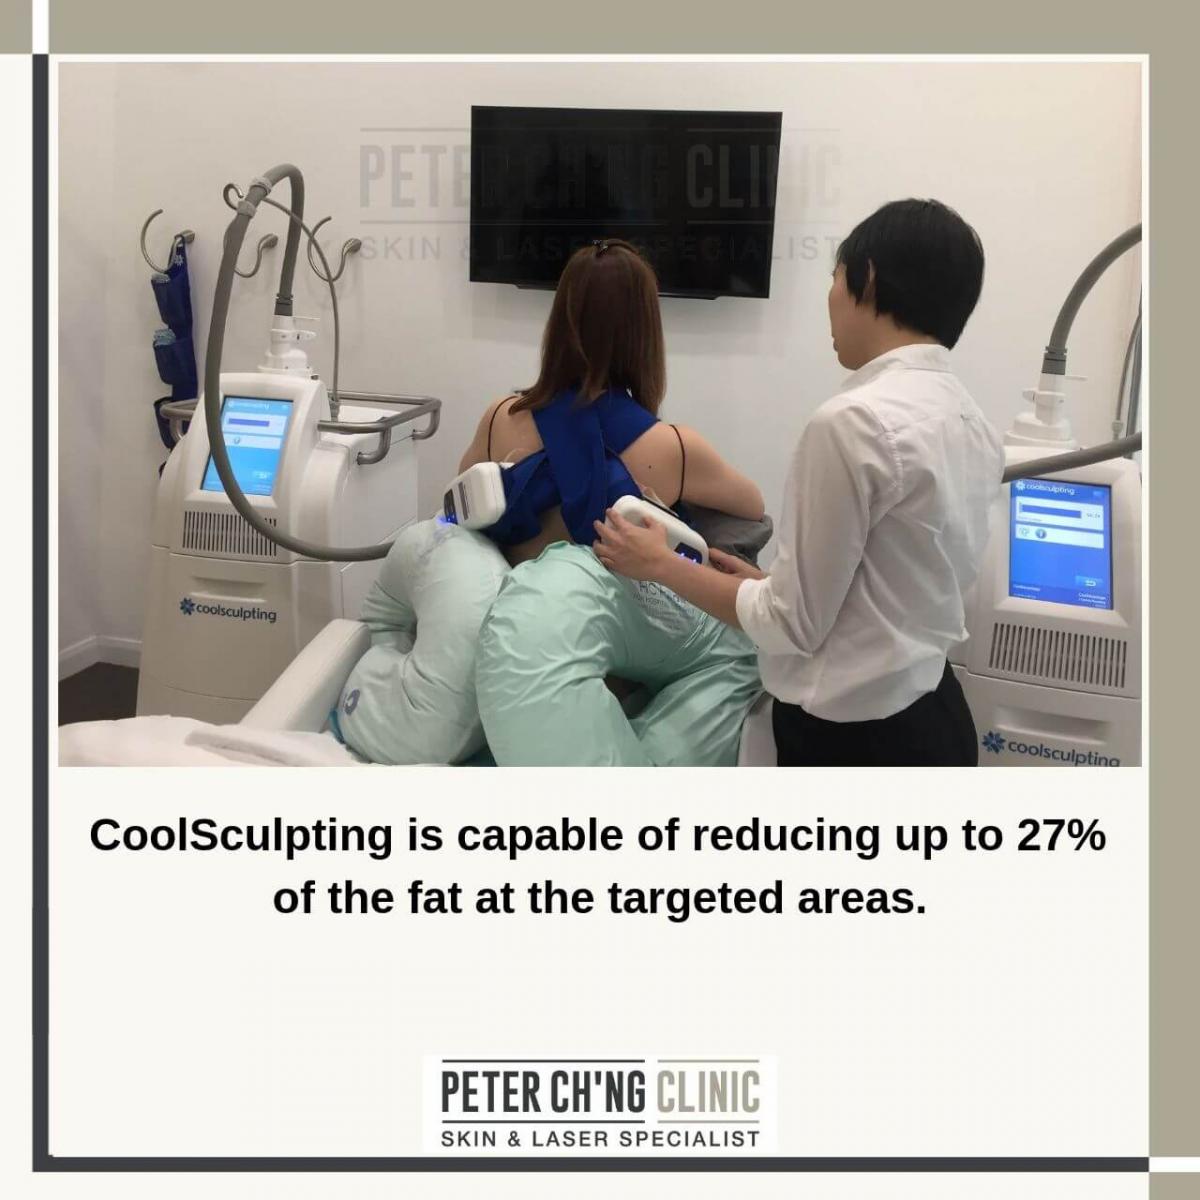 CoolSculpting is capable of reducing up to 27% of the fat at the targeted area.